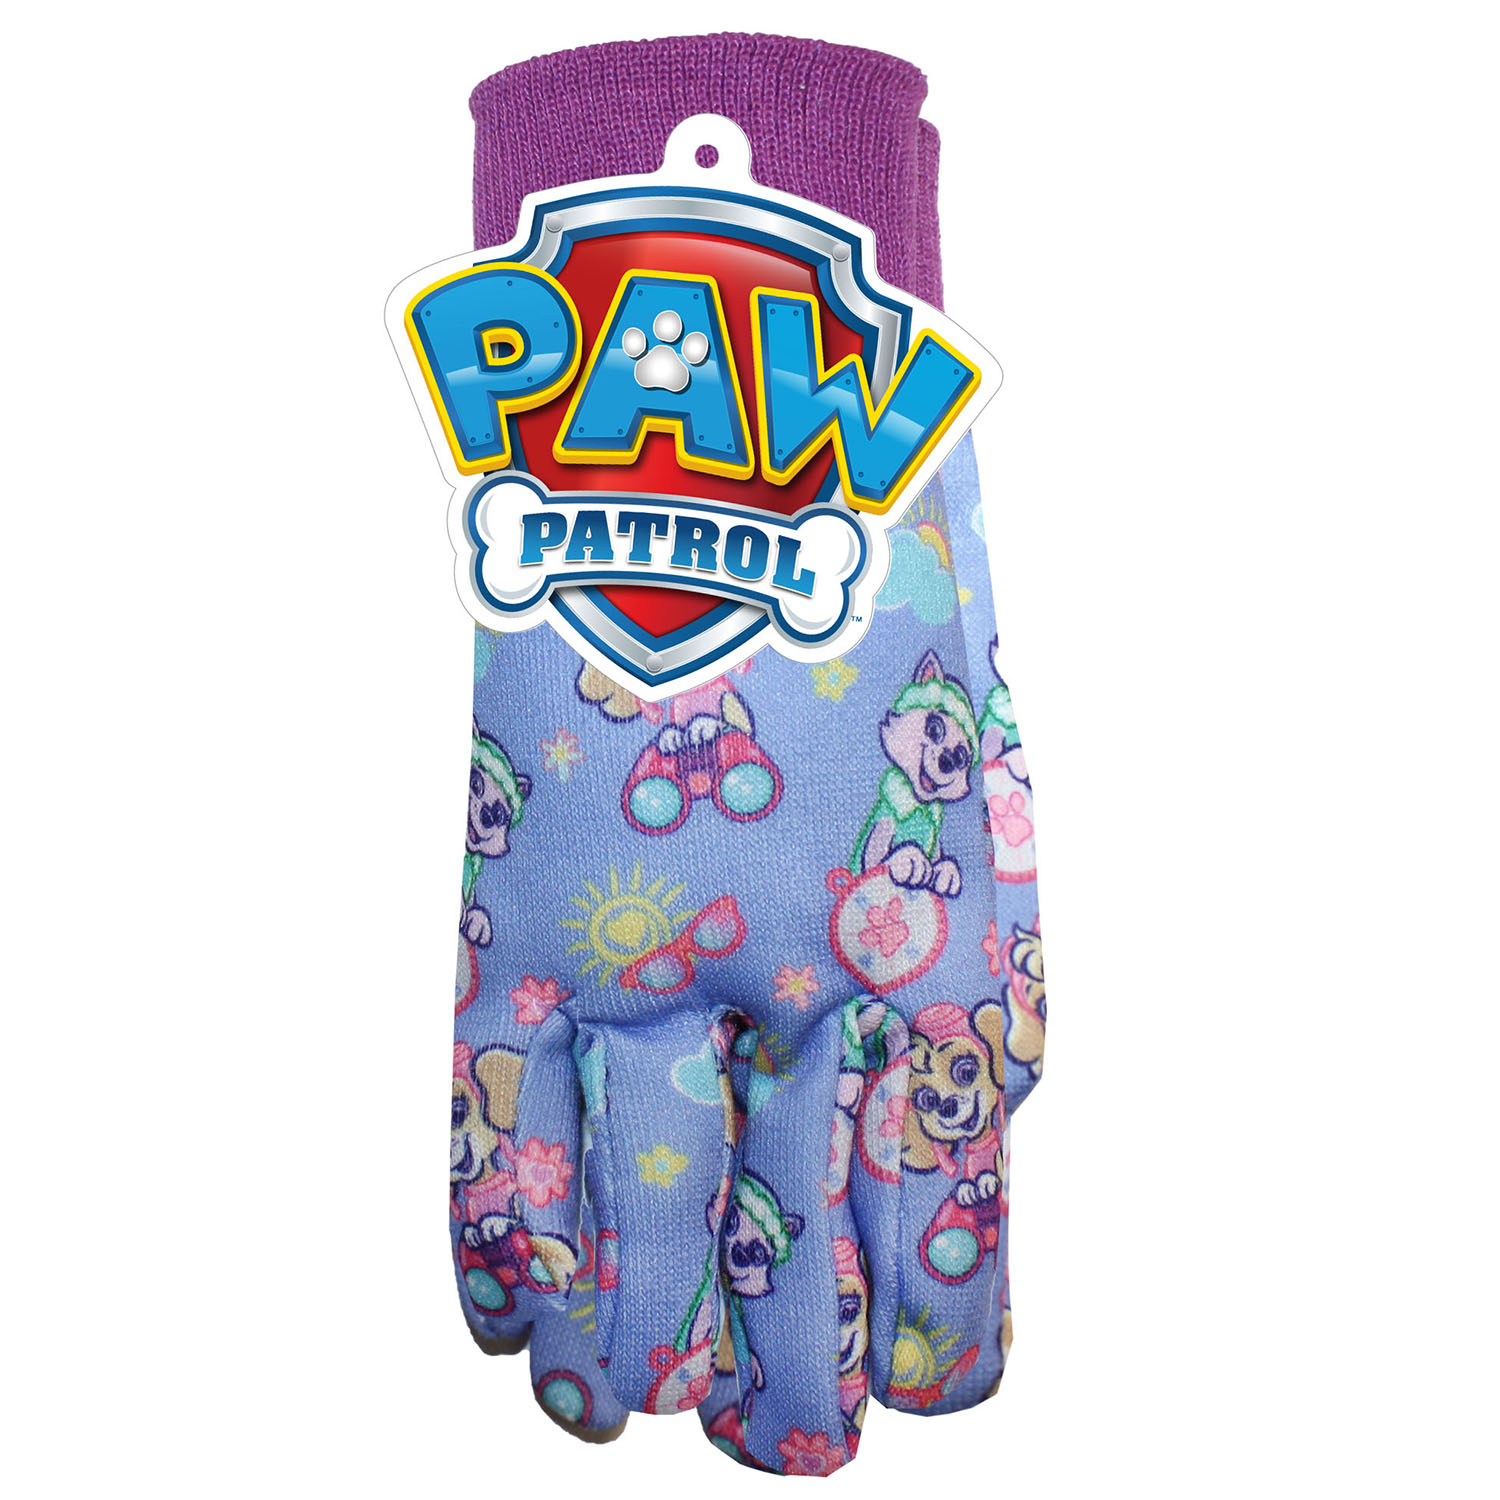 MidWest Gloves & Gear Paw Patrol Pink Toddler Sized Jersey Glove, Gender Neutral - image 2 of 3